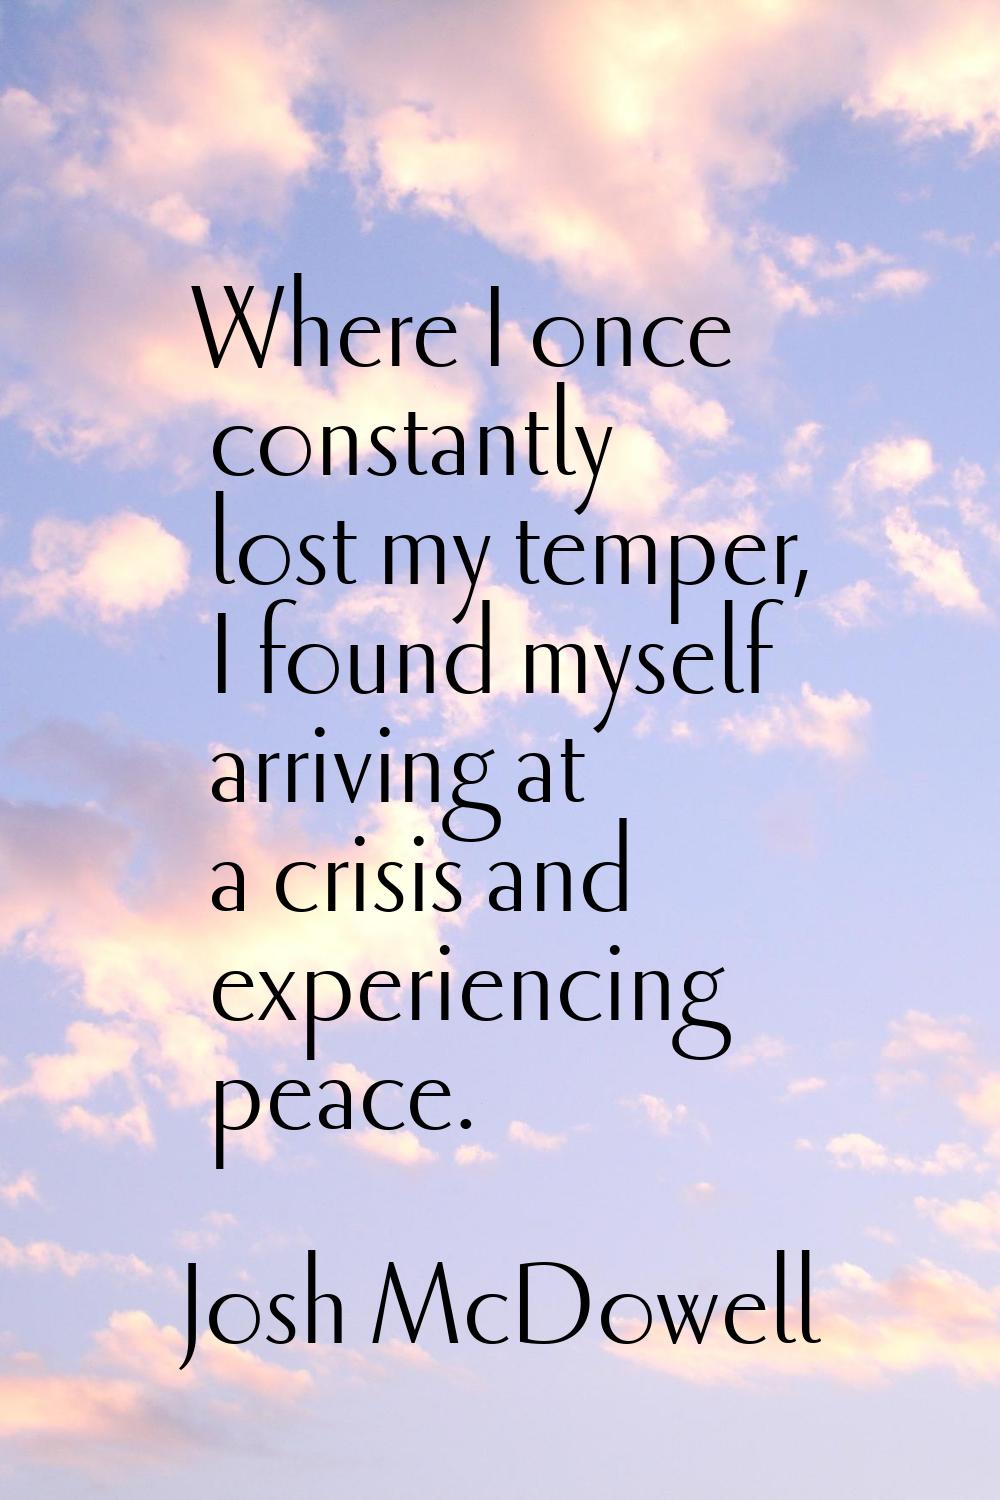 Where I once constantly lost my temper, I found myself arriving at a crisis and experiencing peace.